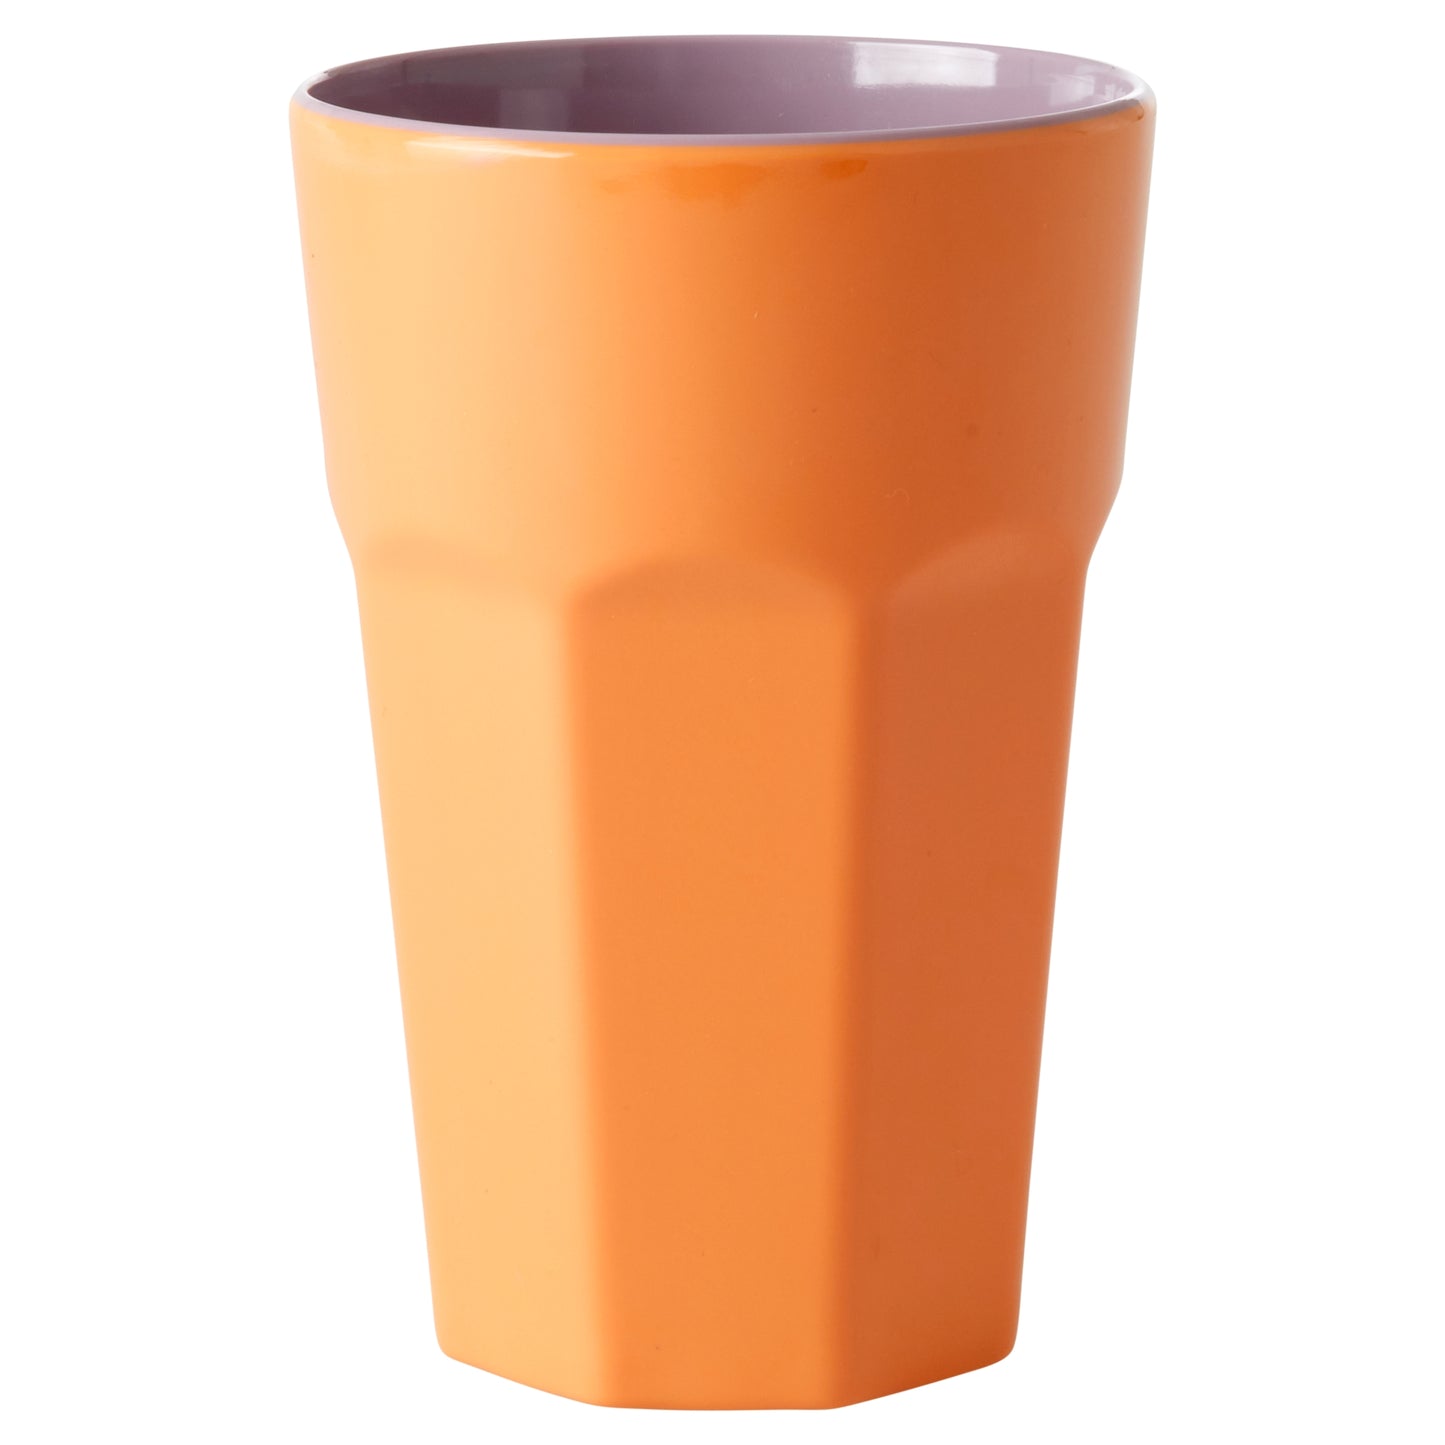 Melamine Cup in Apricot - Tall